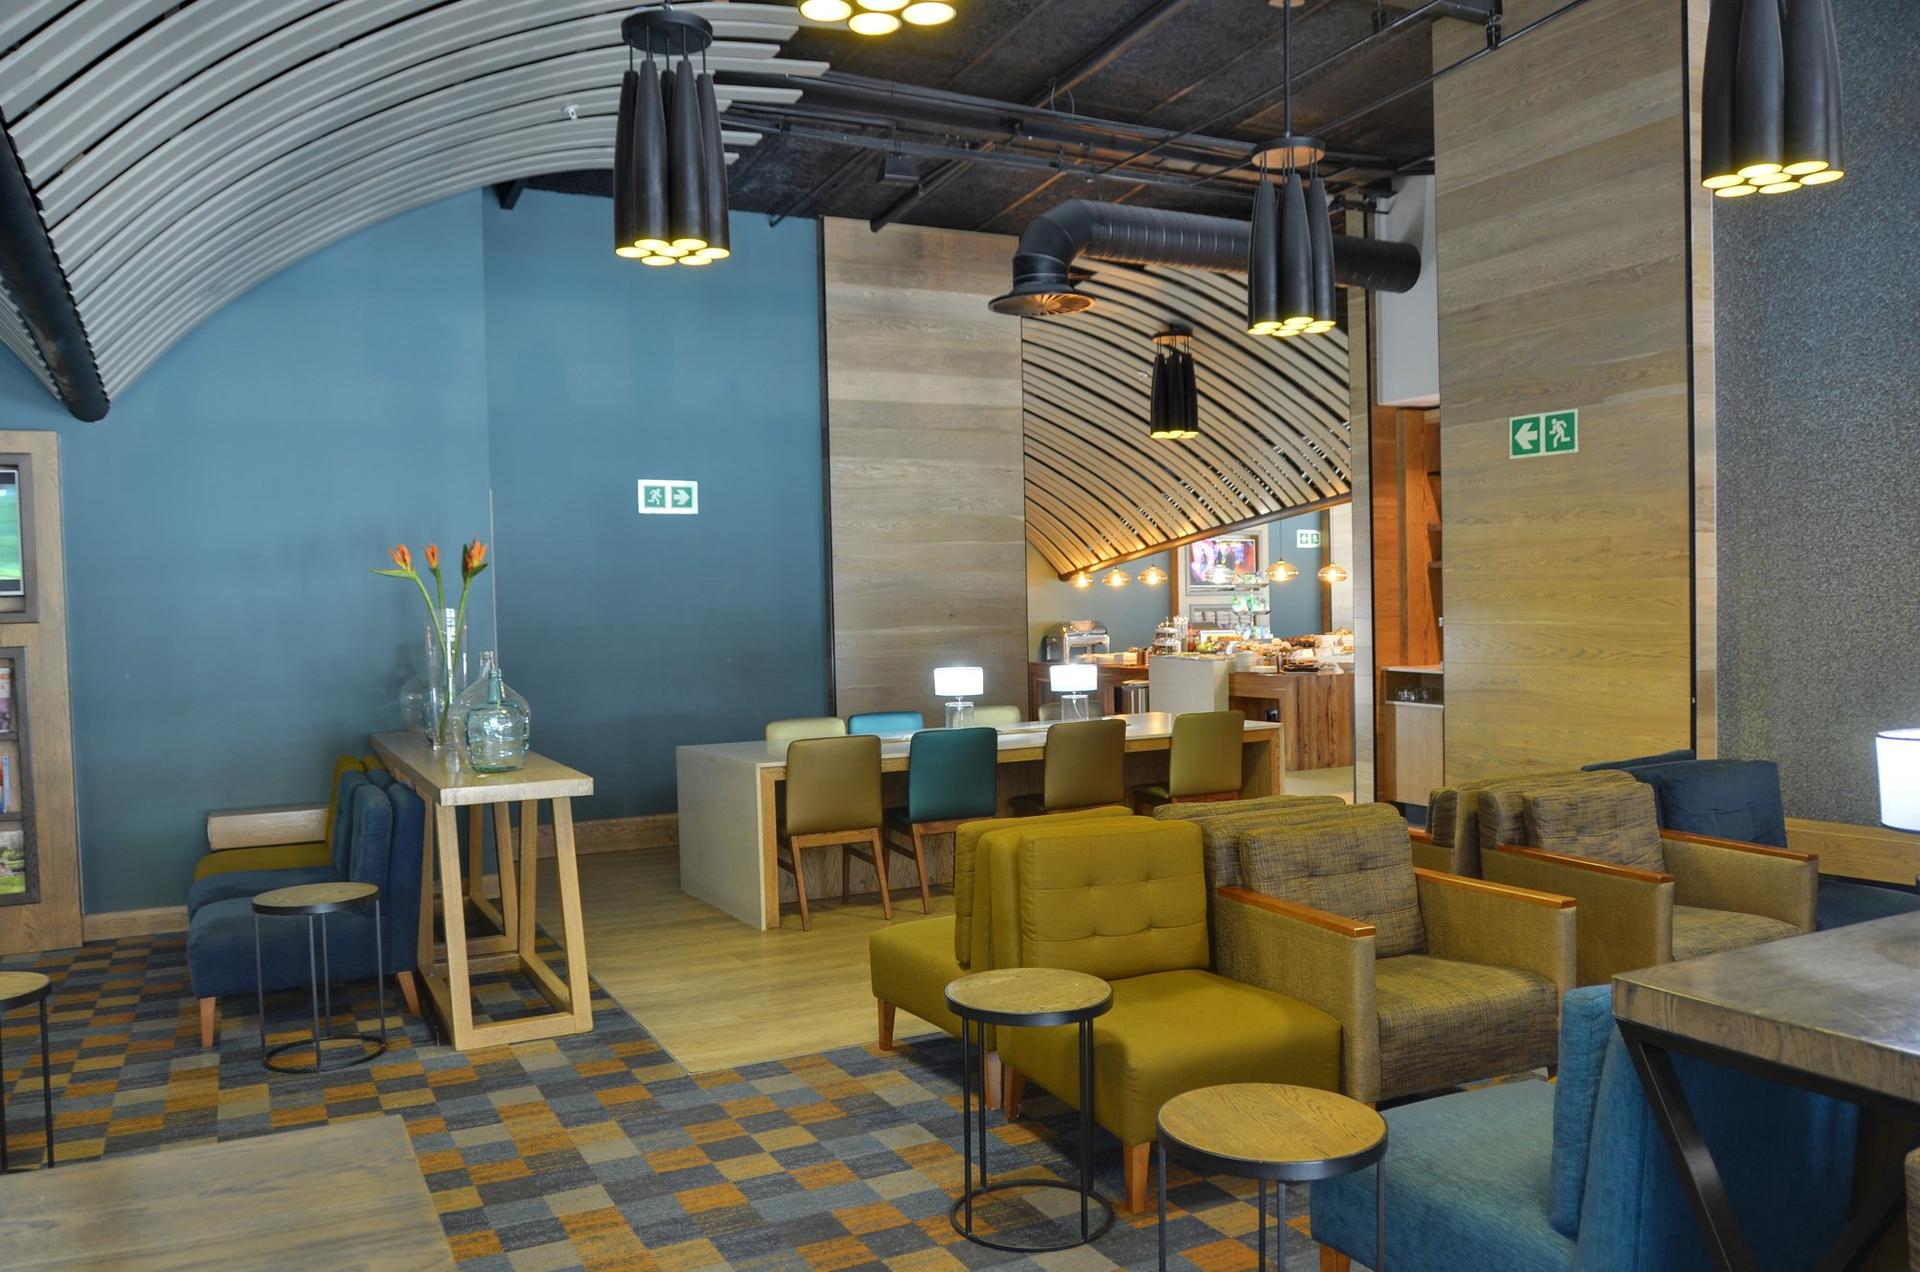 CPT International Sky Lounge image 8 of 15